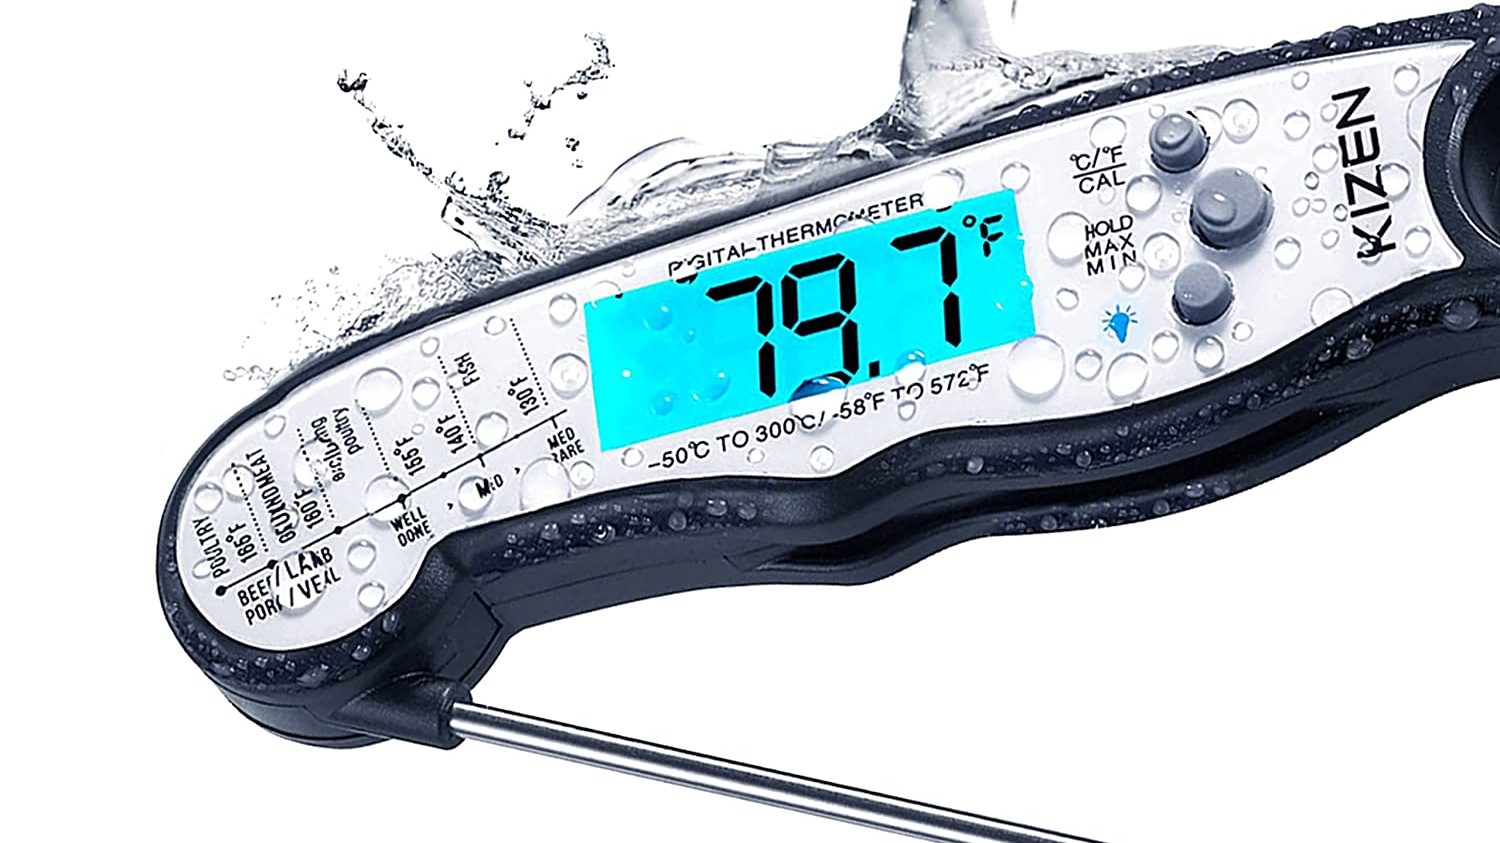 Showing the thermometer is waterproof